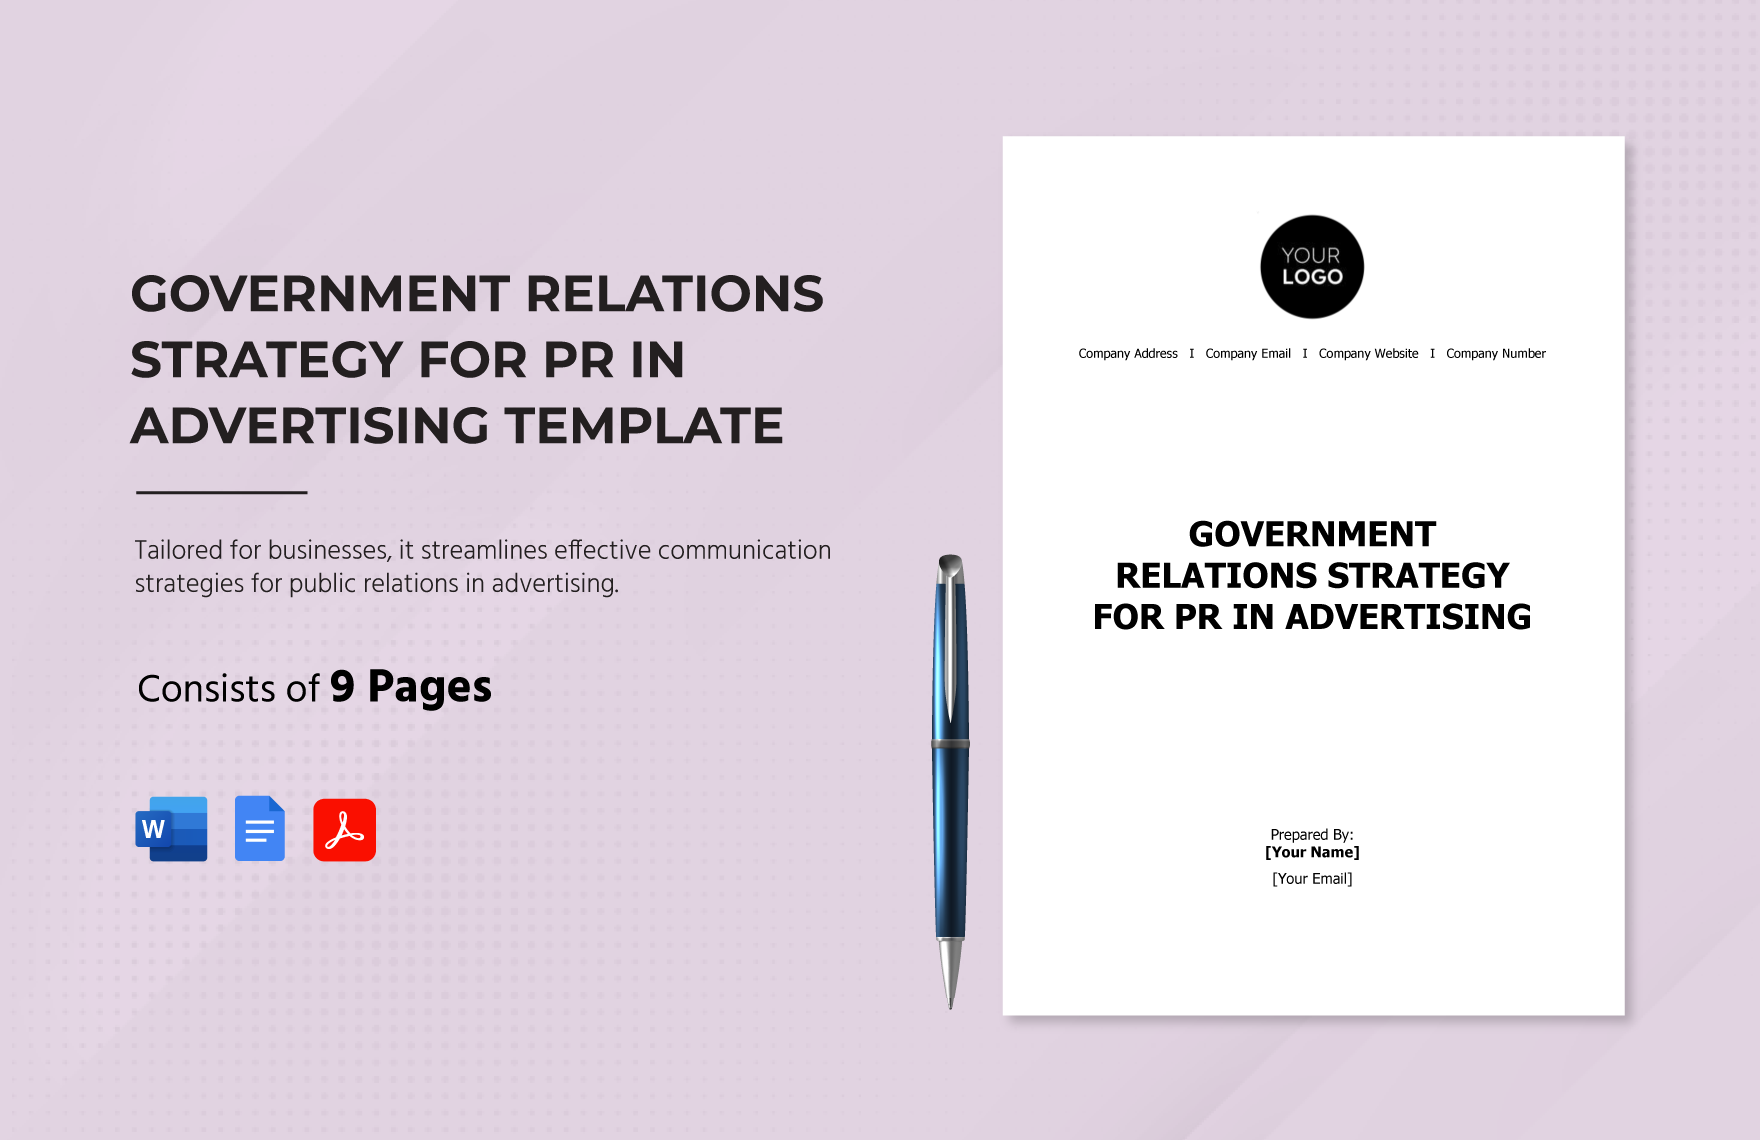 Government Relations Strategy for PR in Advertising Template